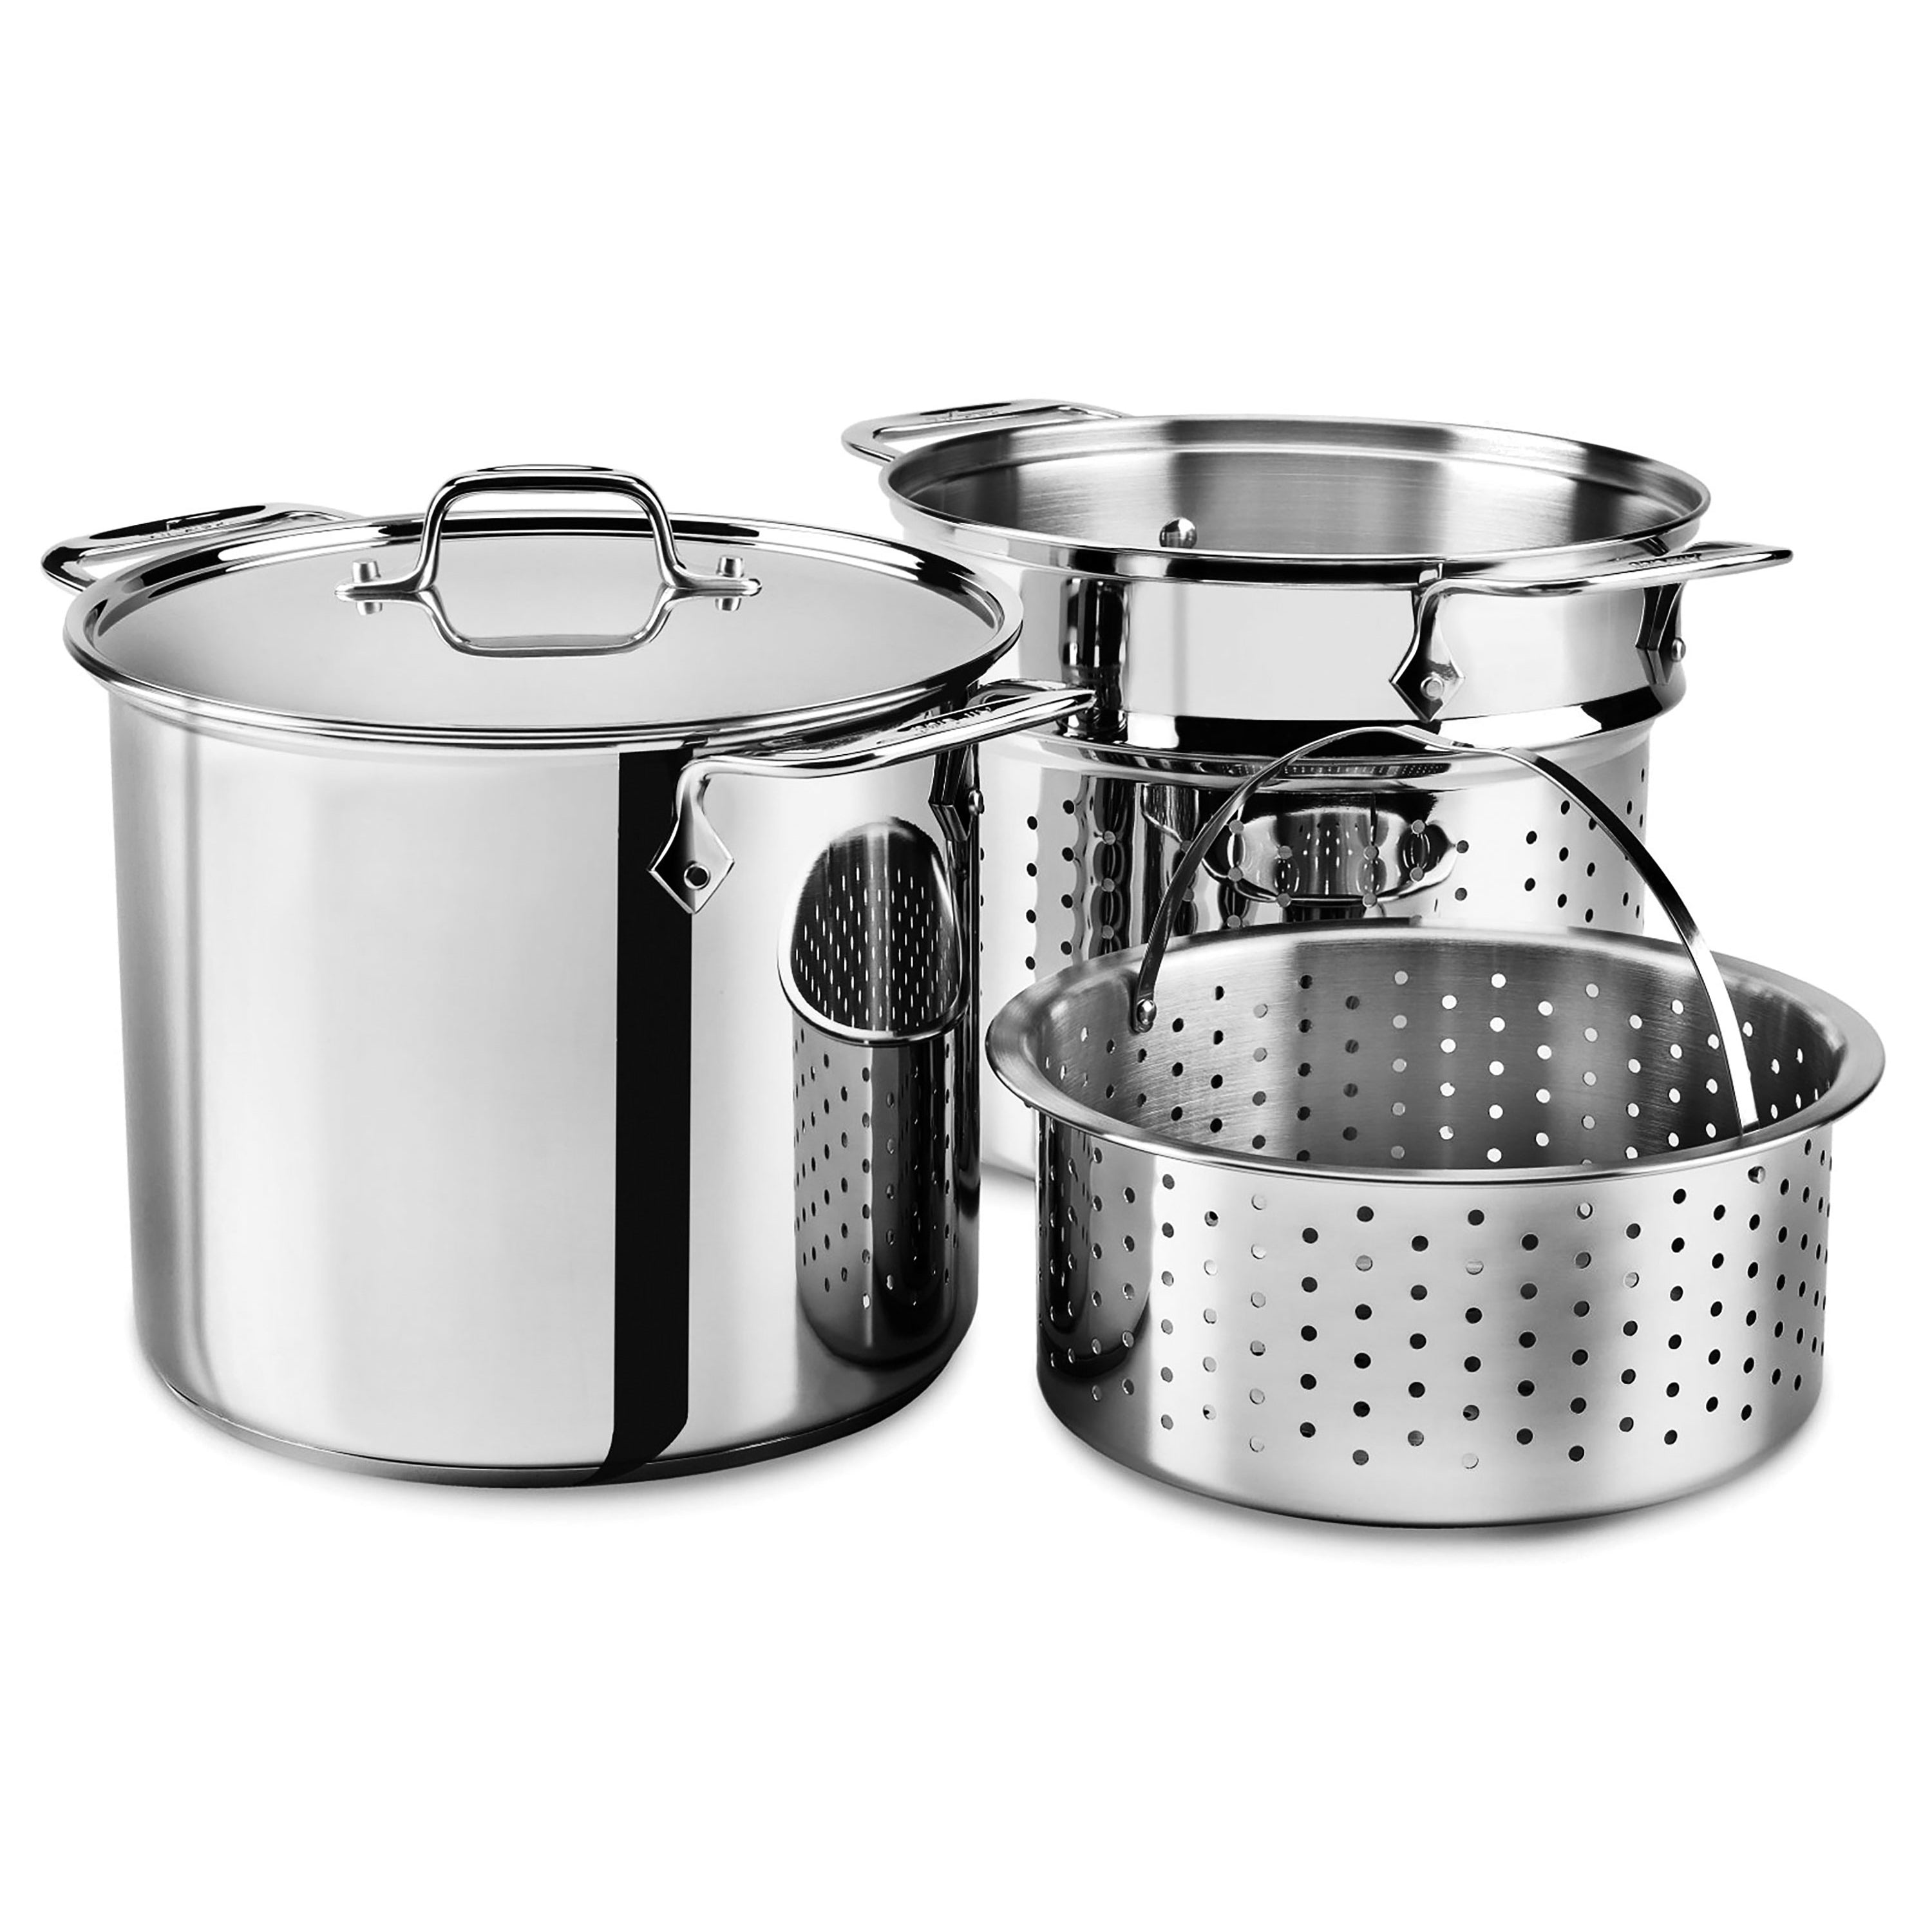 All-Clad Stainless Steel Multi-Function Stock Pot - 8-quart